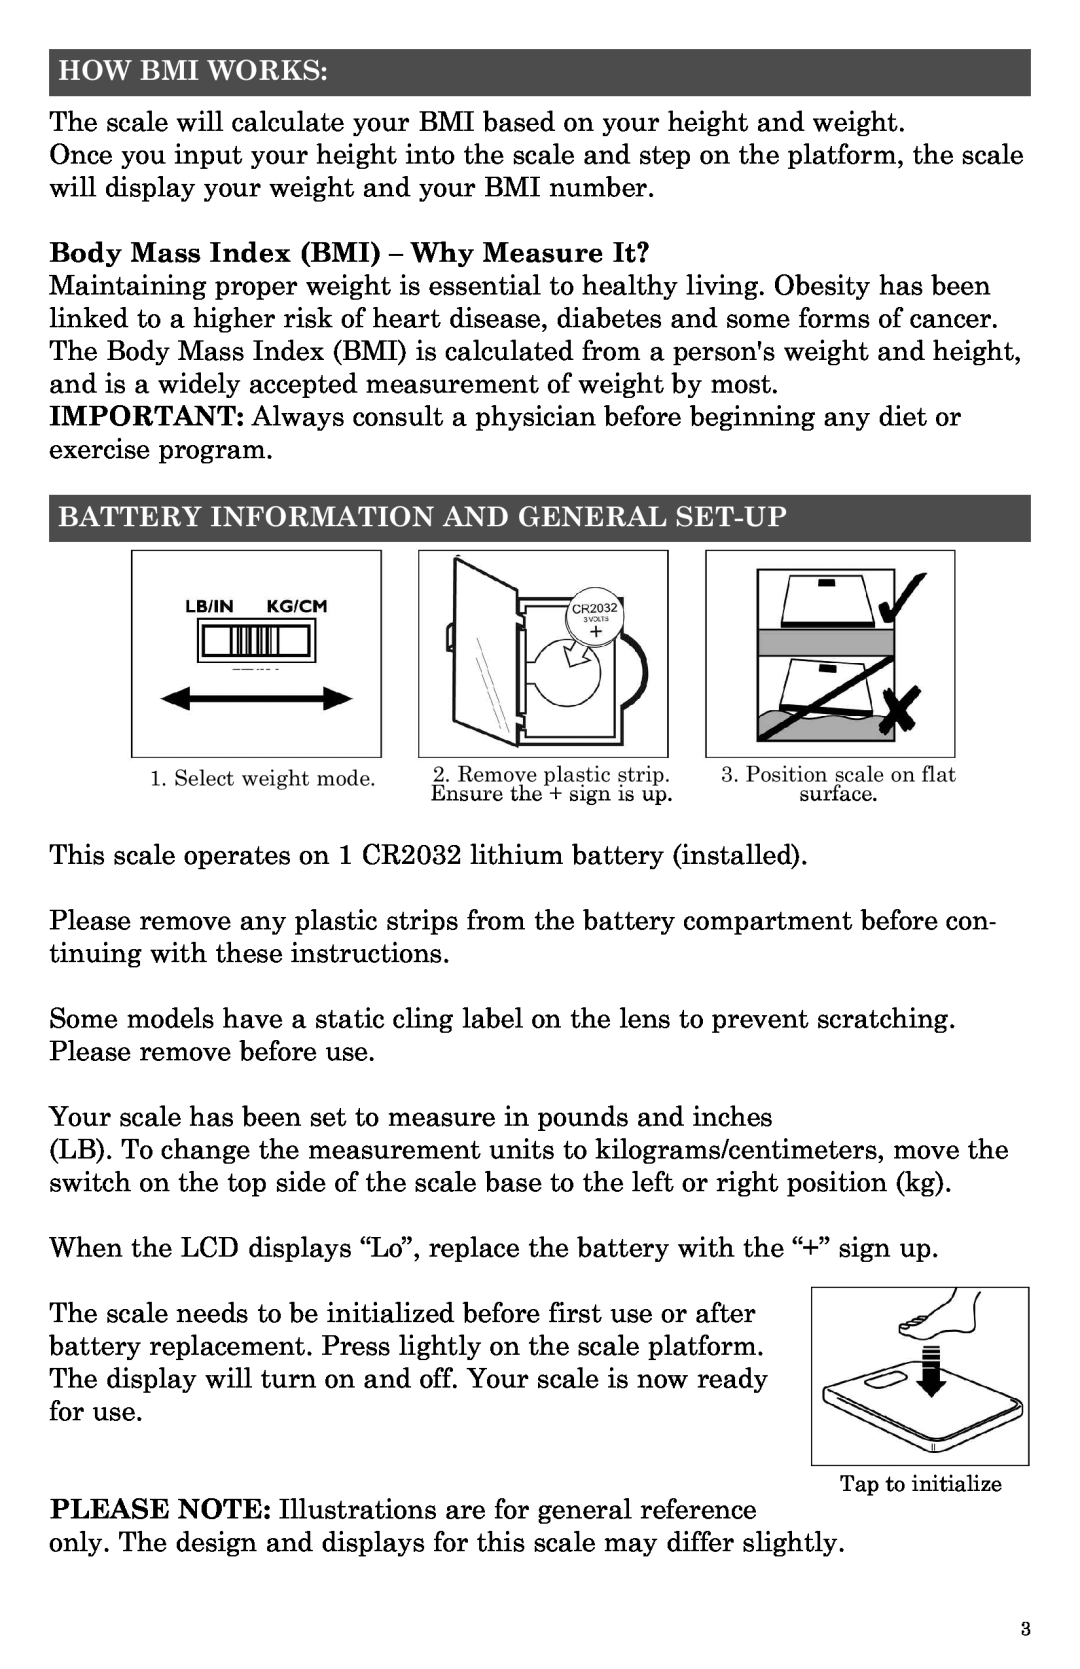 Taylor 7544BL How Bmi Works, Body Mass Index BMI - Why Measure It?, Battery Information And General Set-Up 